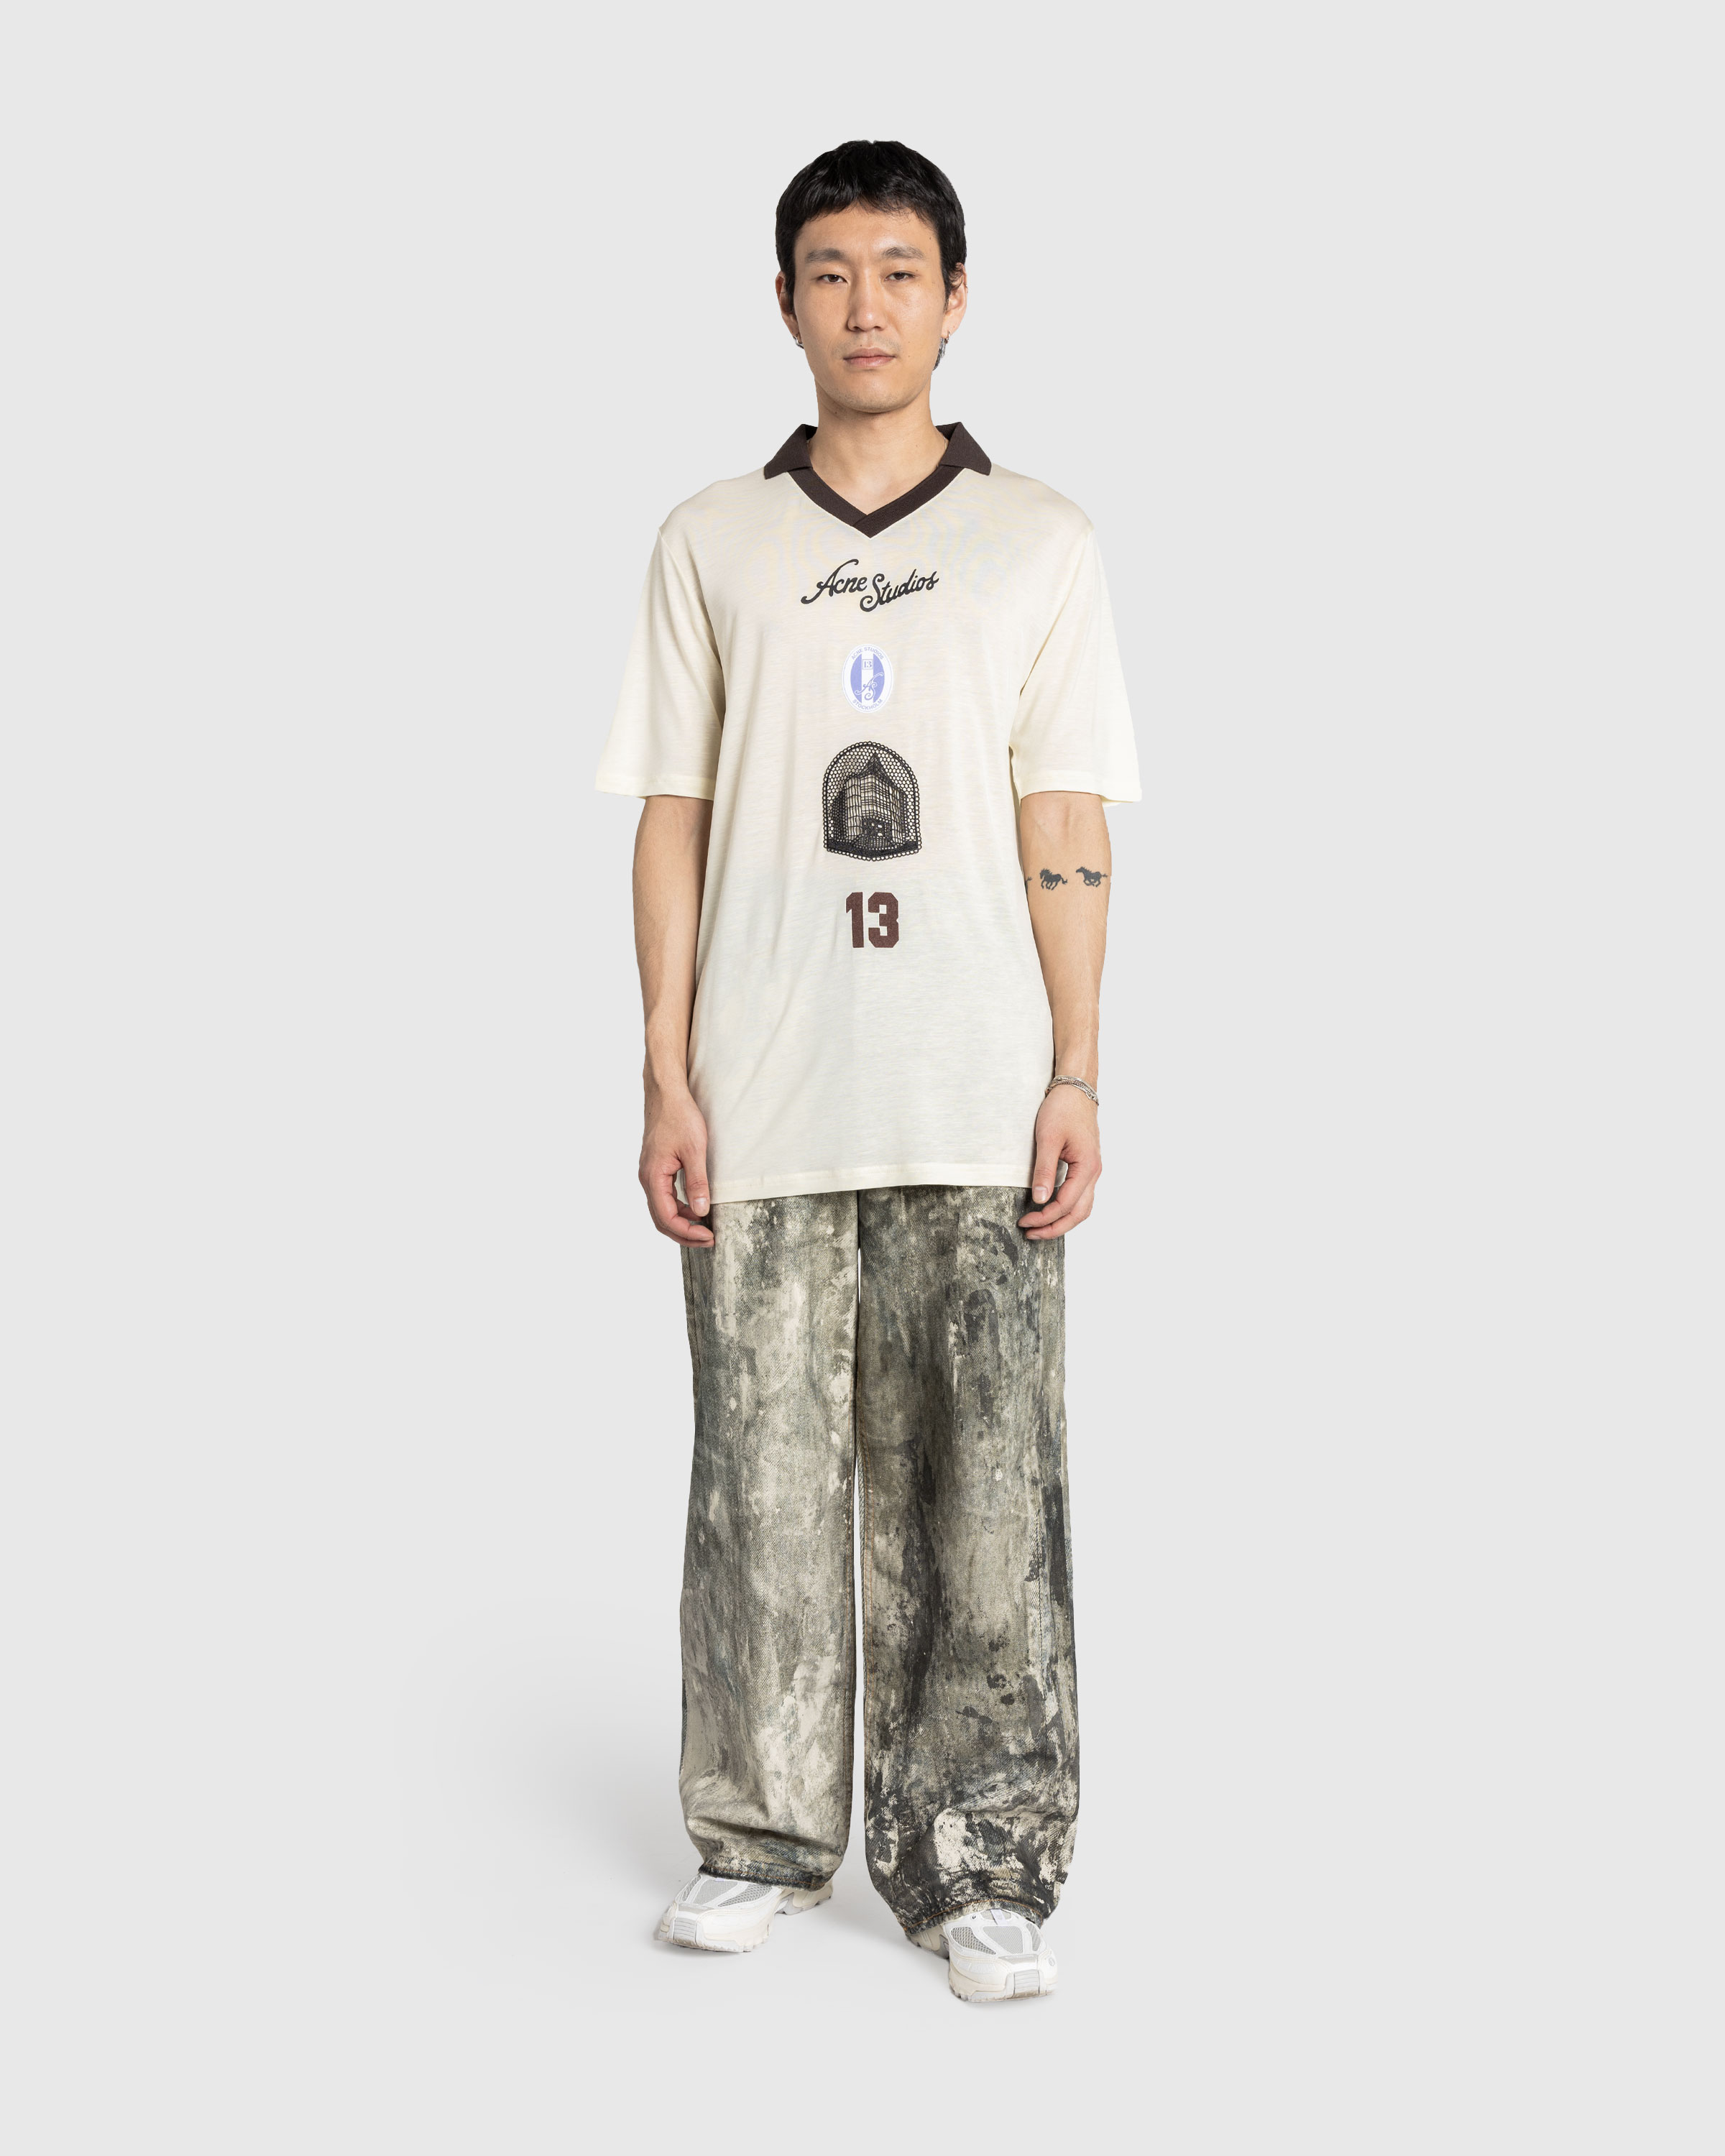 Acne Studios – Loose Fit Trousers 1981M Cold Grey - Pants - Grey - Image 3